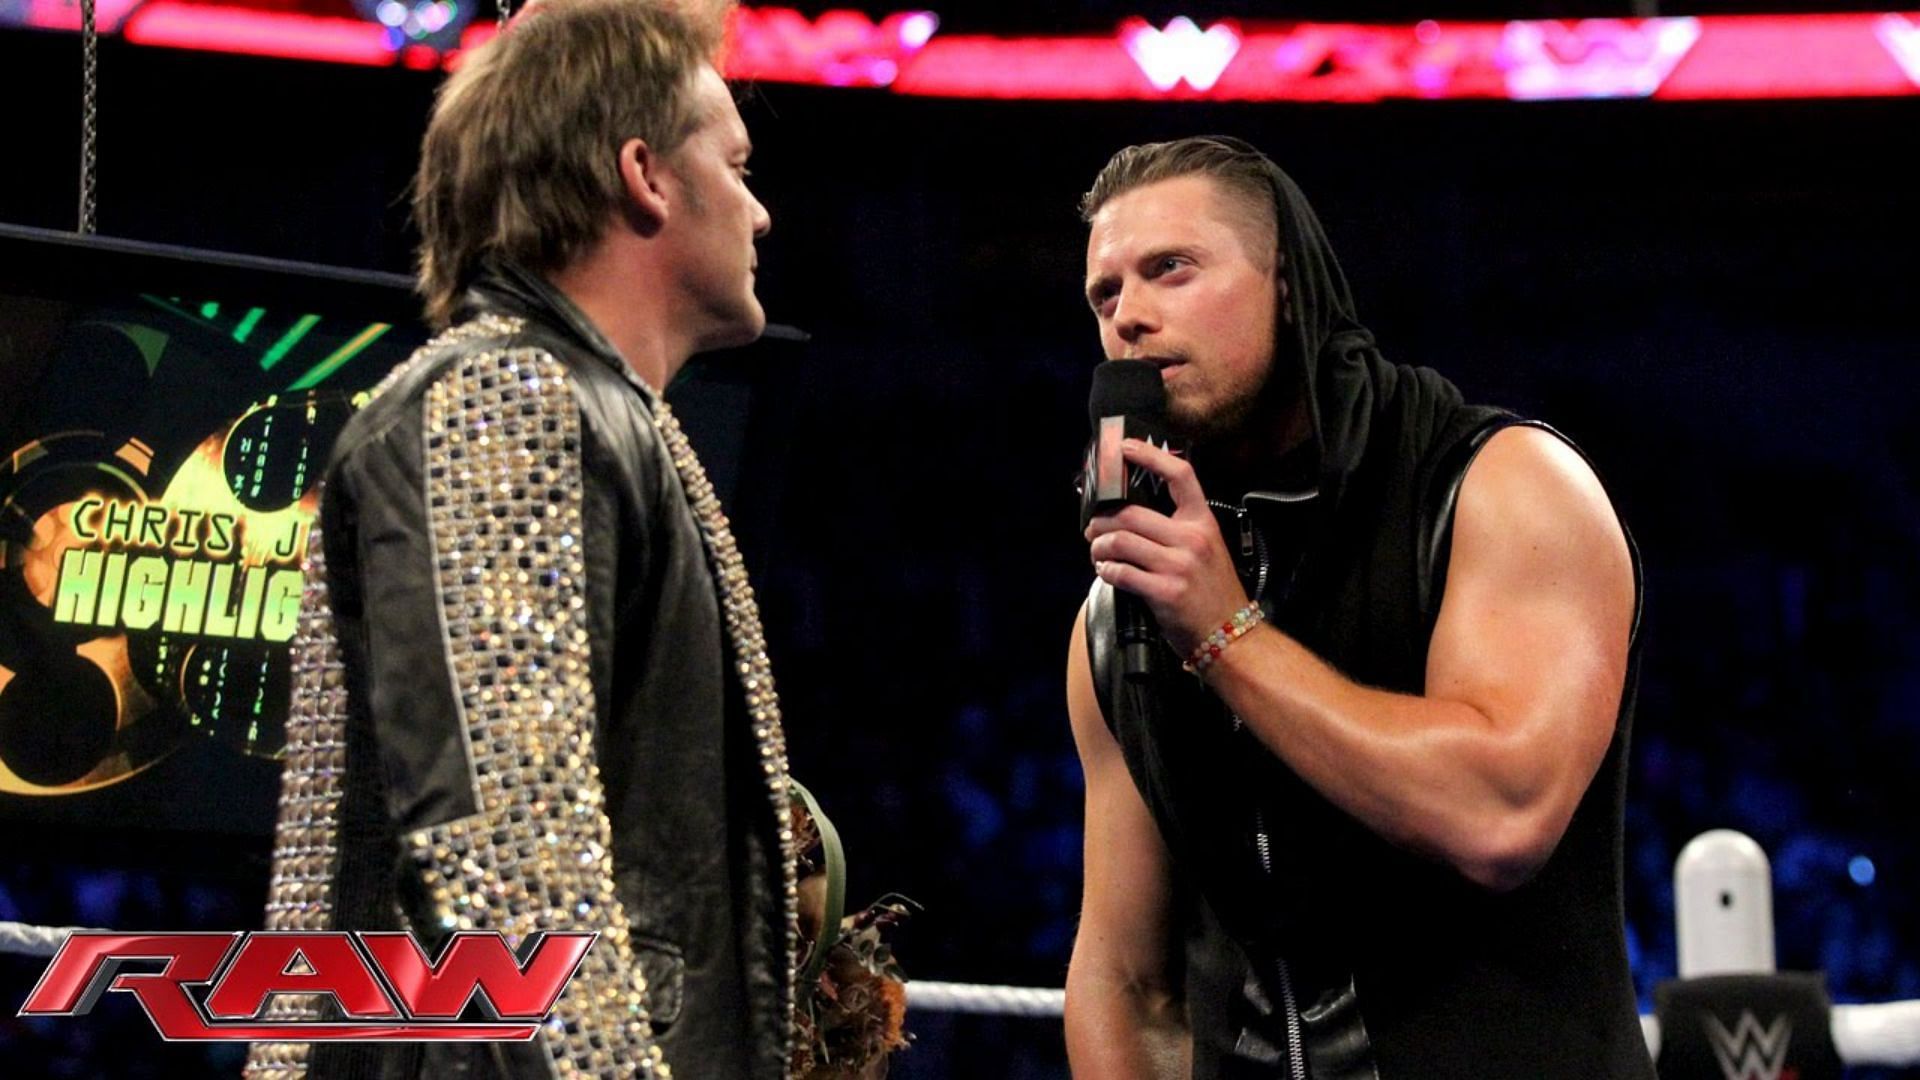 Chris Jericho and Miz have faced each other only three times in singles competition